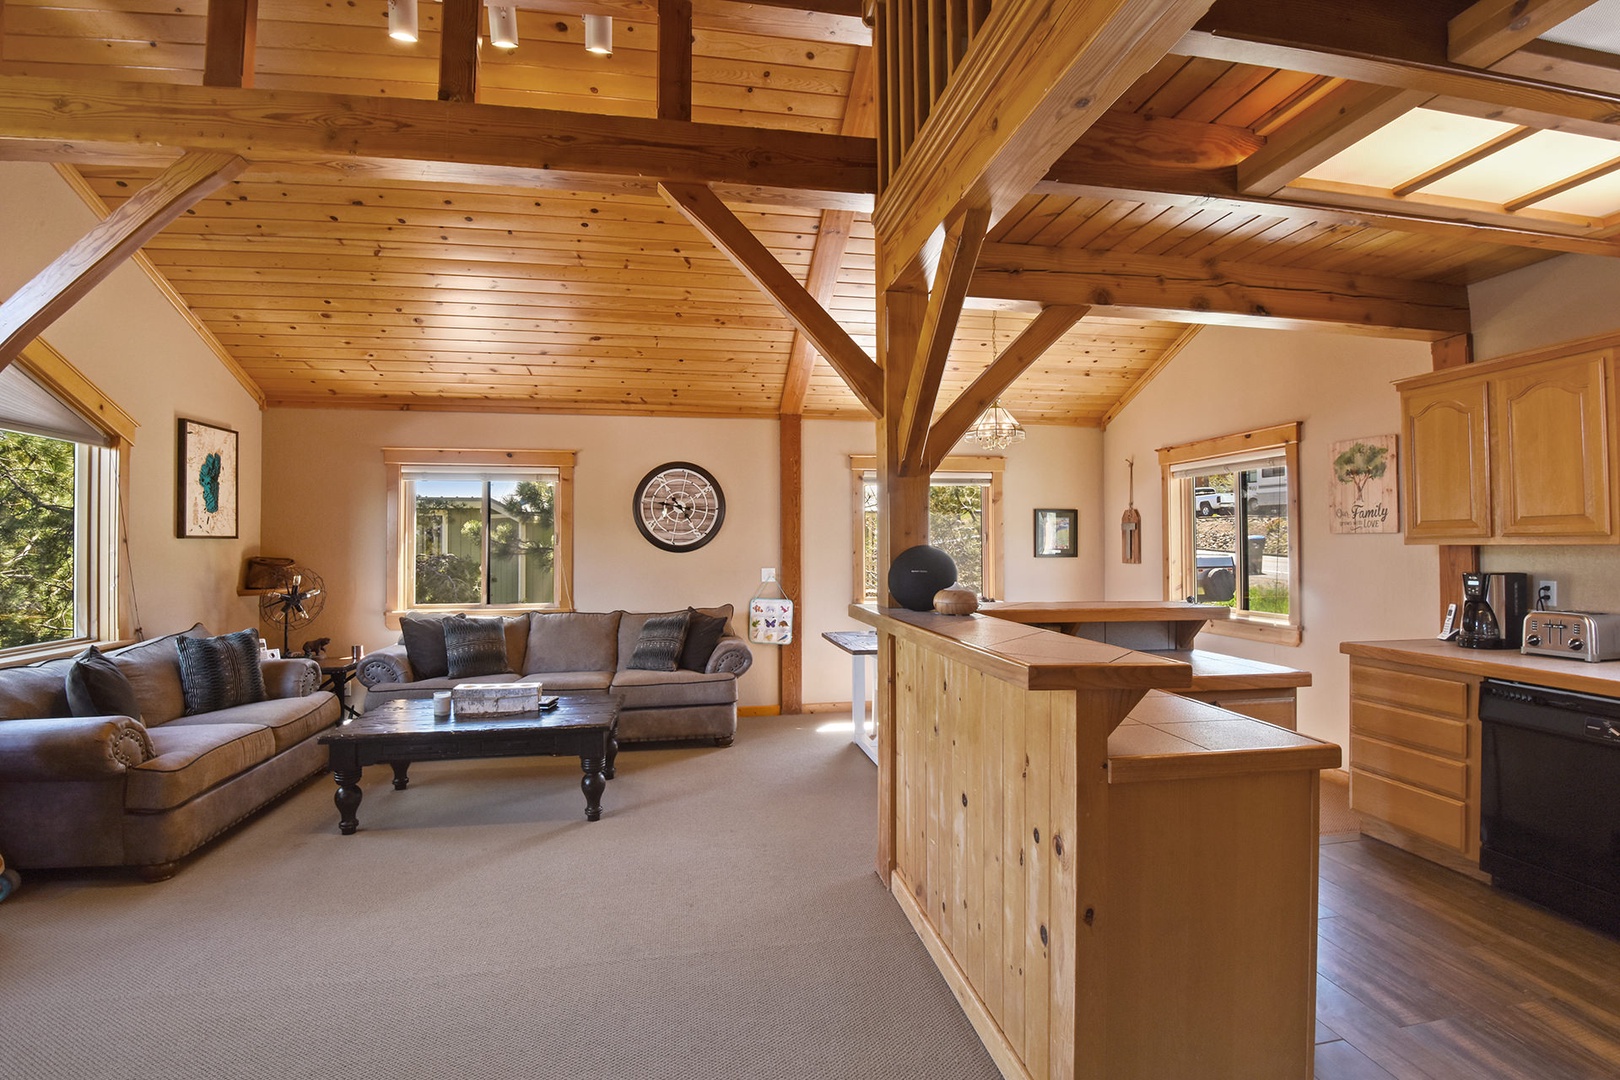 High vaulted ceilings provides that natural lighting